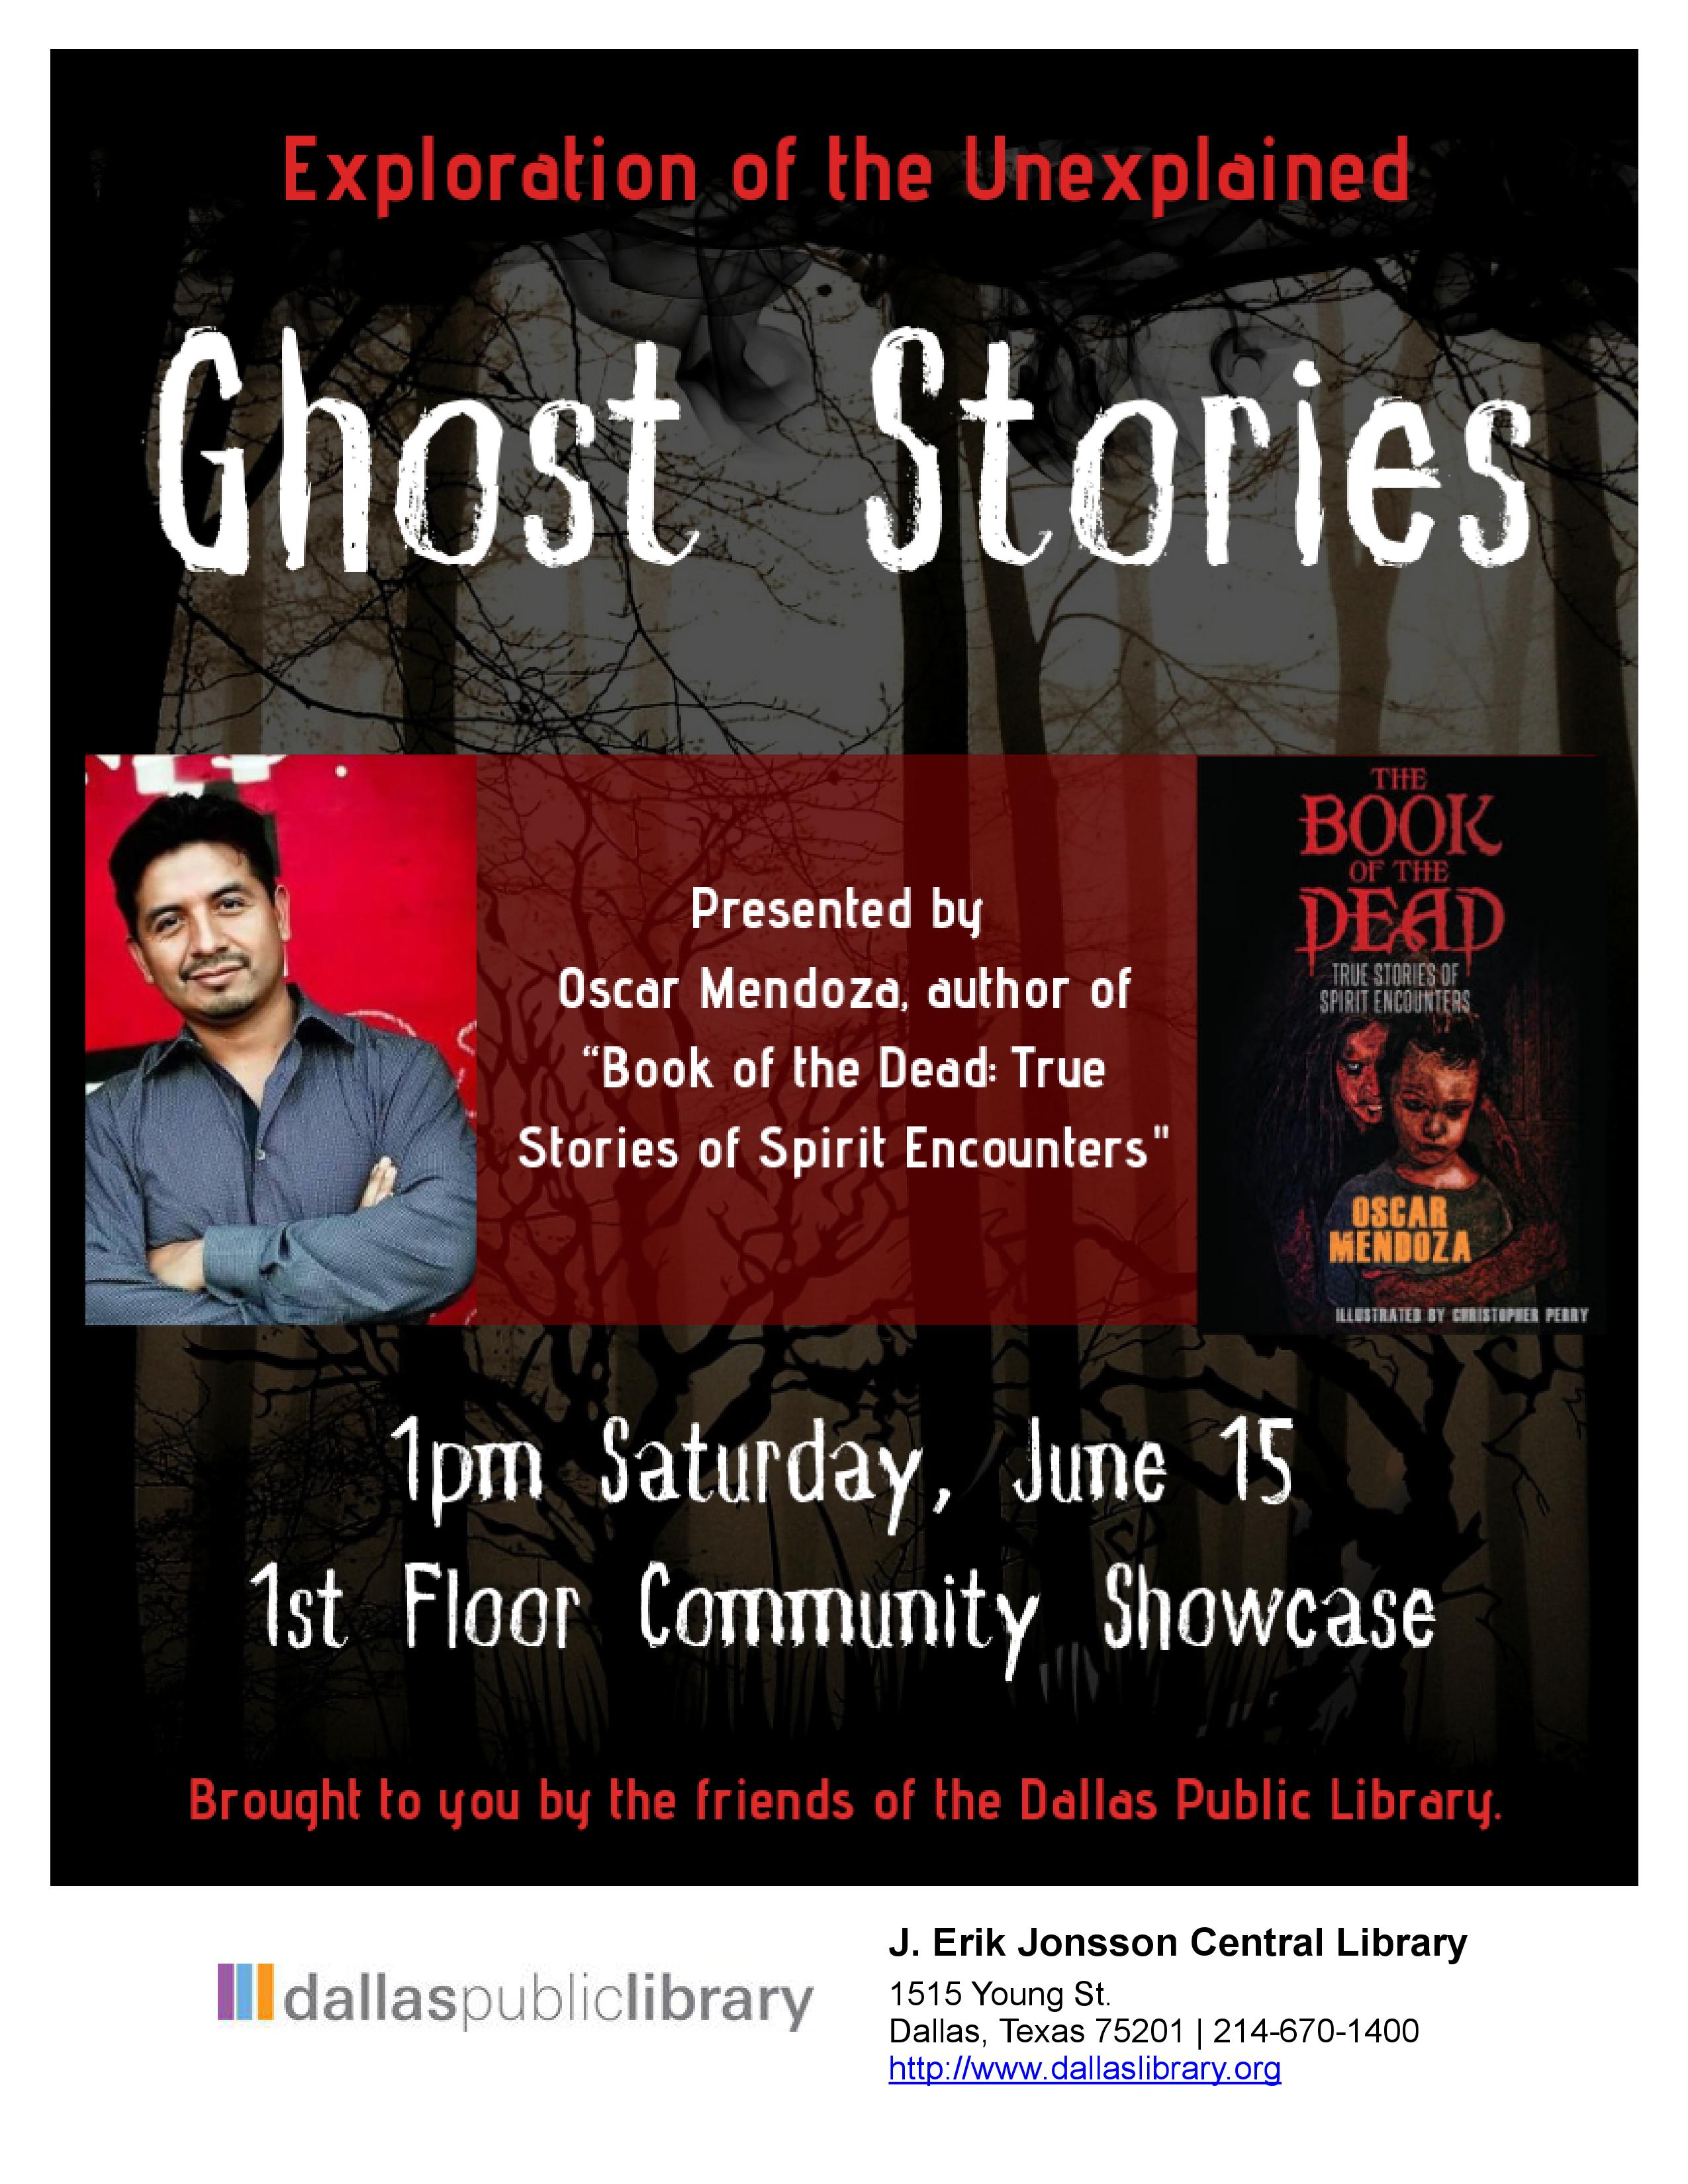 Ghost Stories flyer